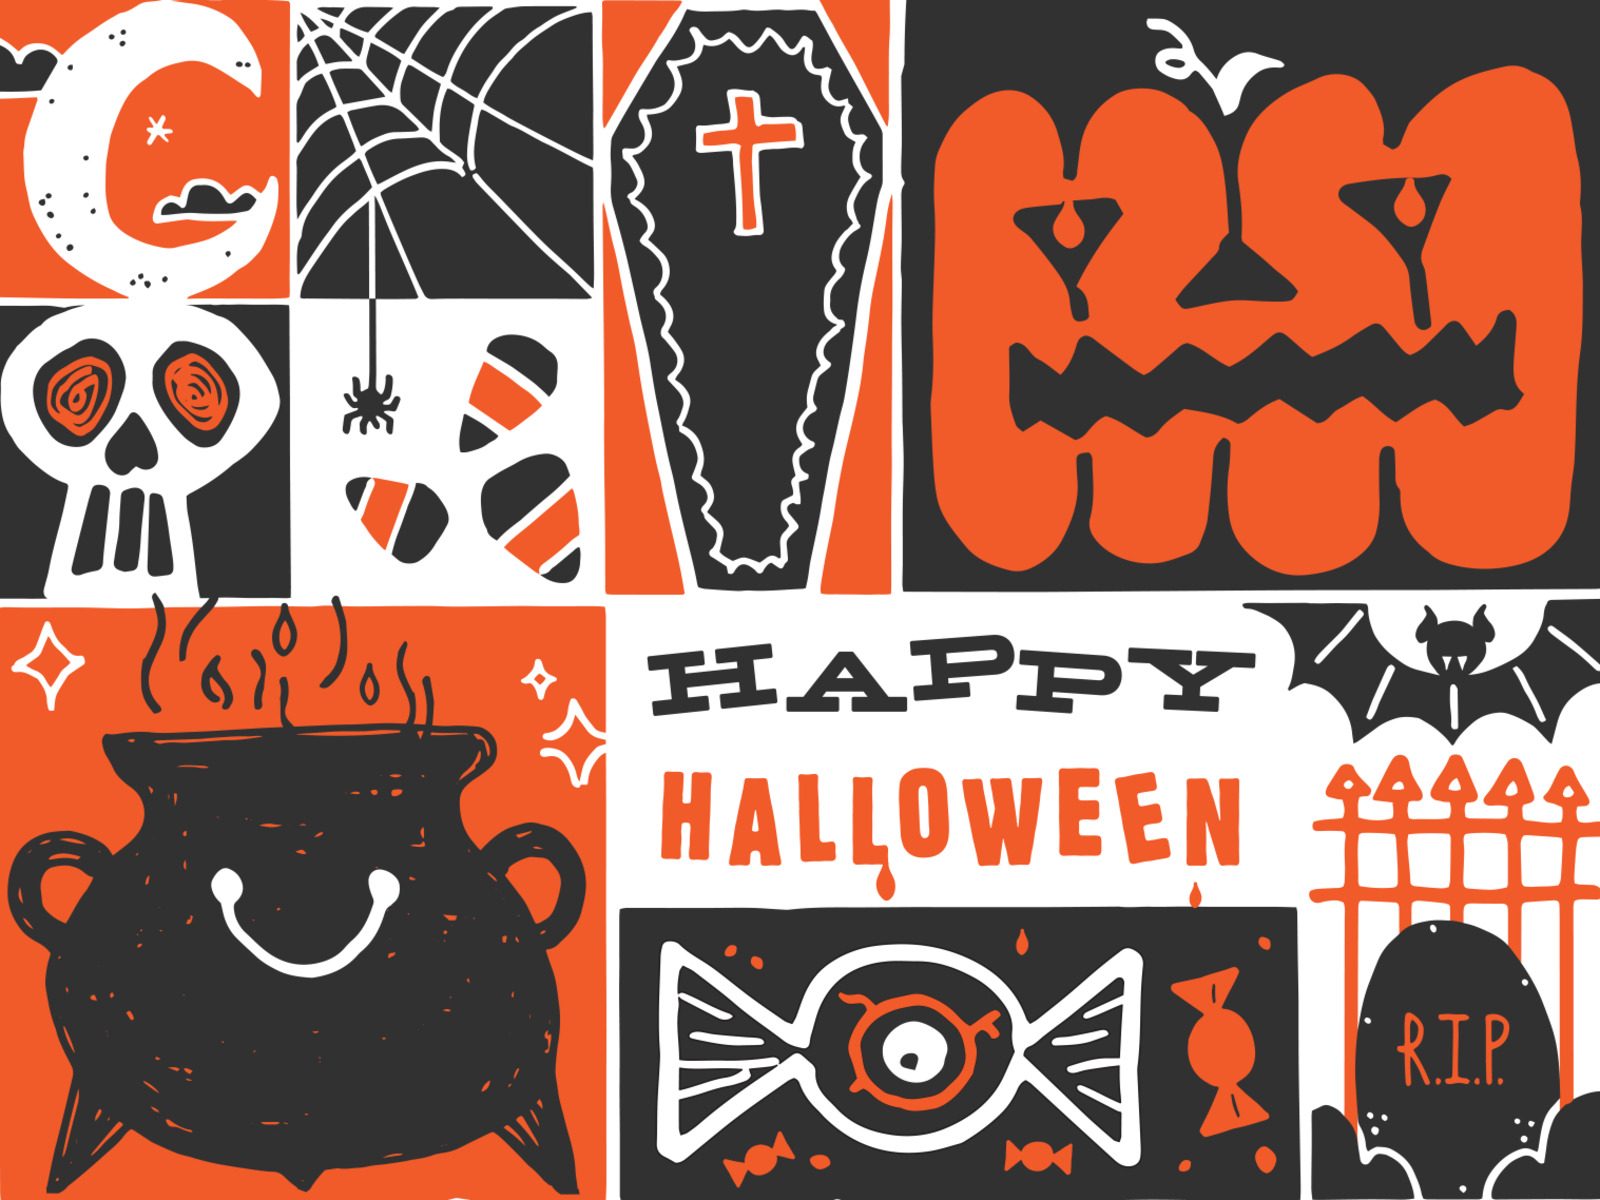 Candy, Cauldrons, and Coffins, Oh My! Halloween 2022 design graphic design halloween illustration malley design spooky